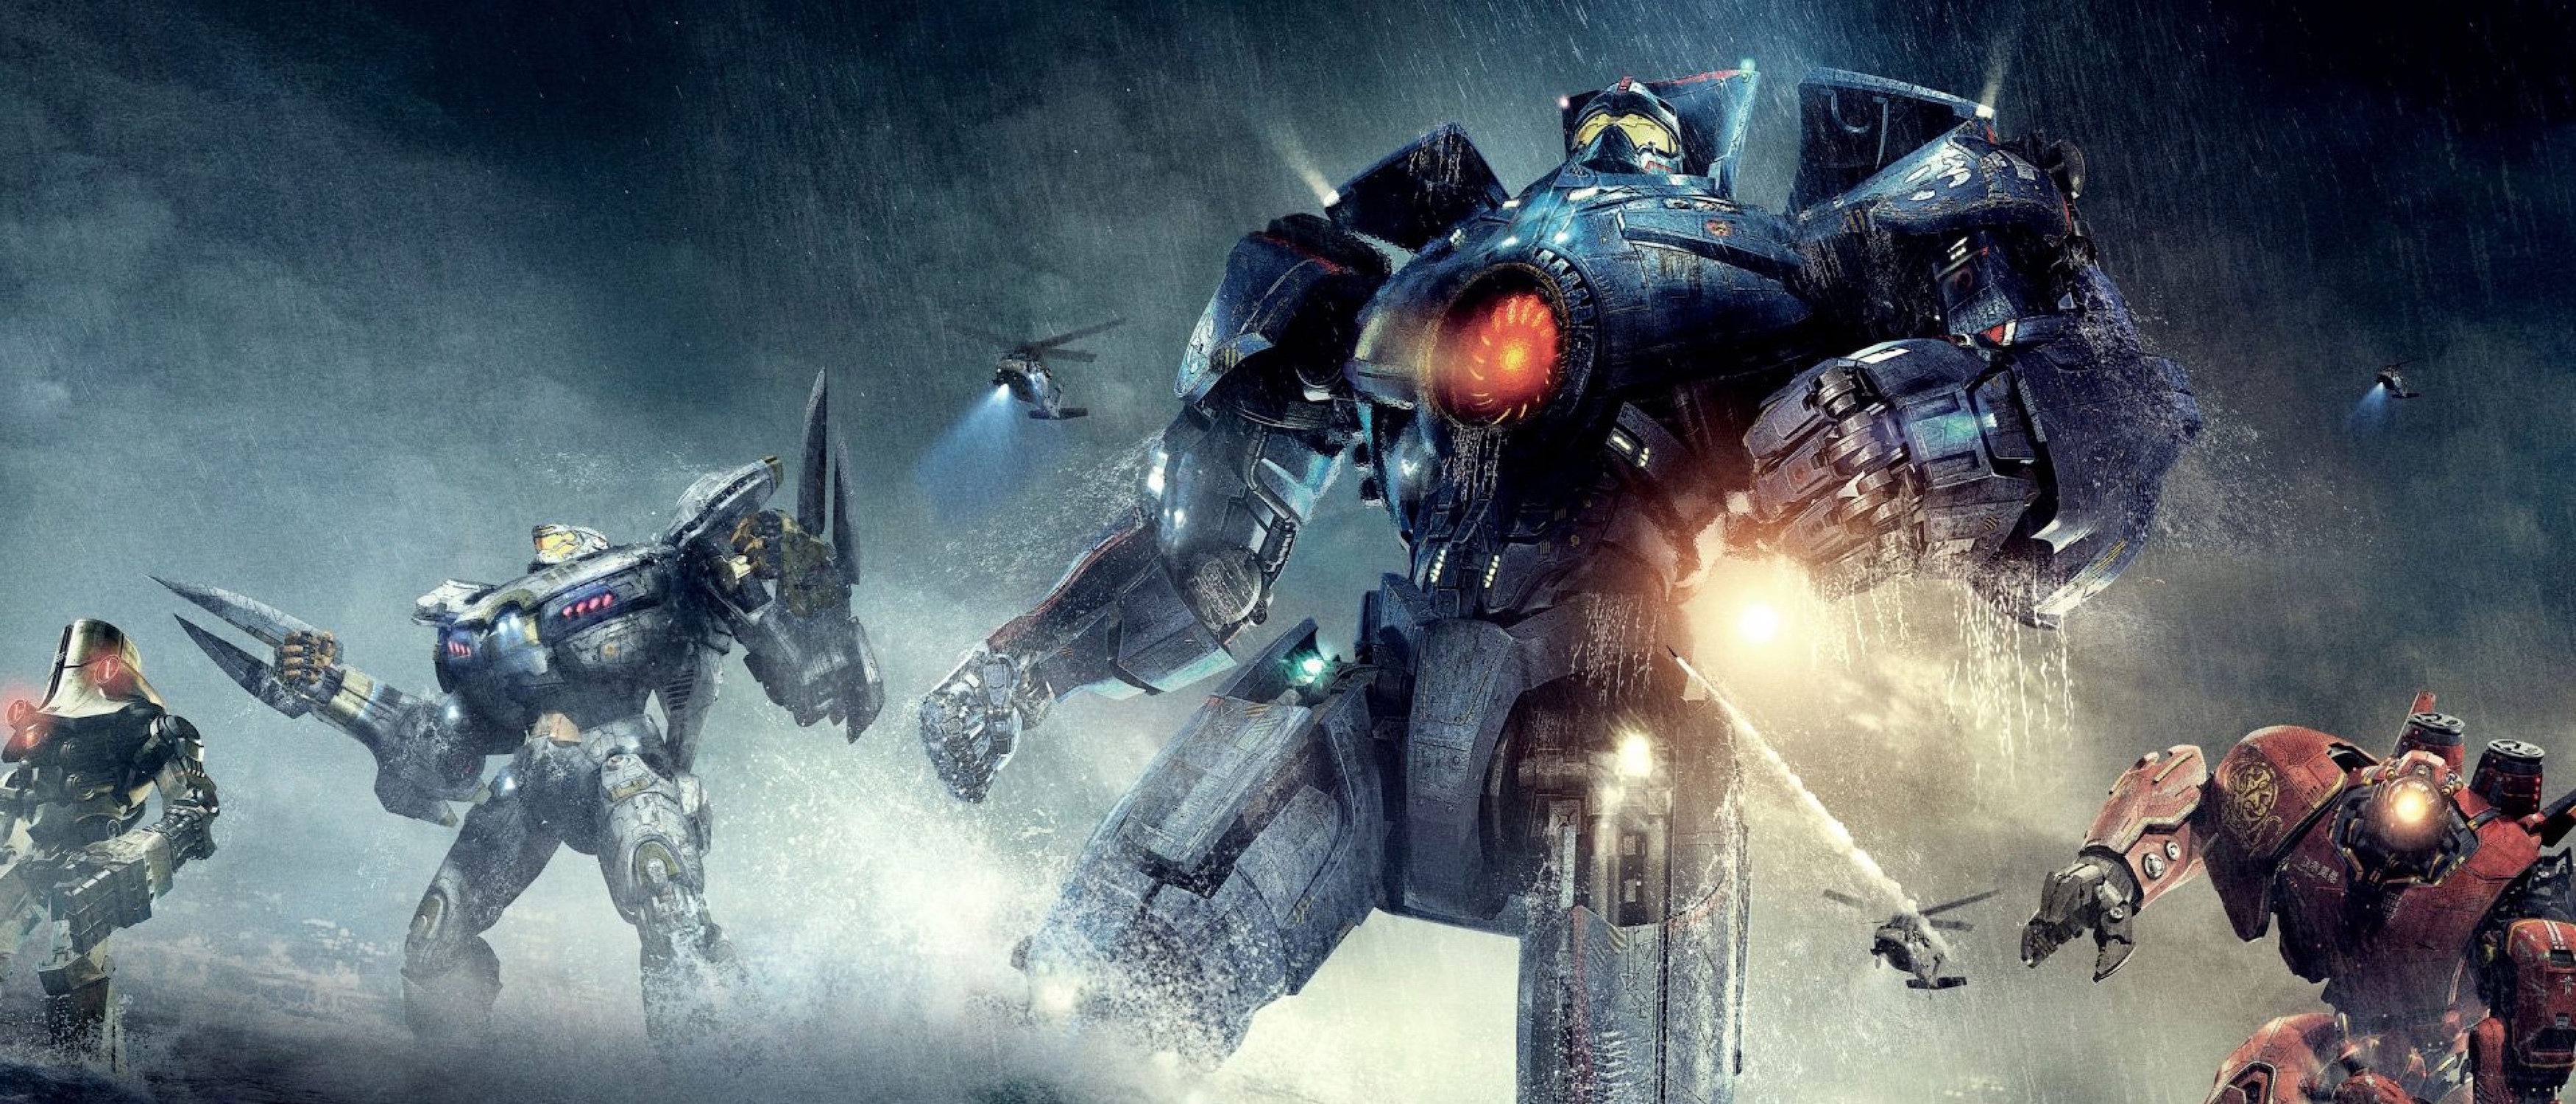 Pacific Rim: Uprising Jaegers: First Look at the New Robots